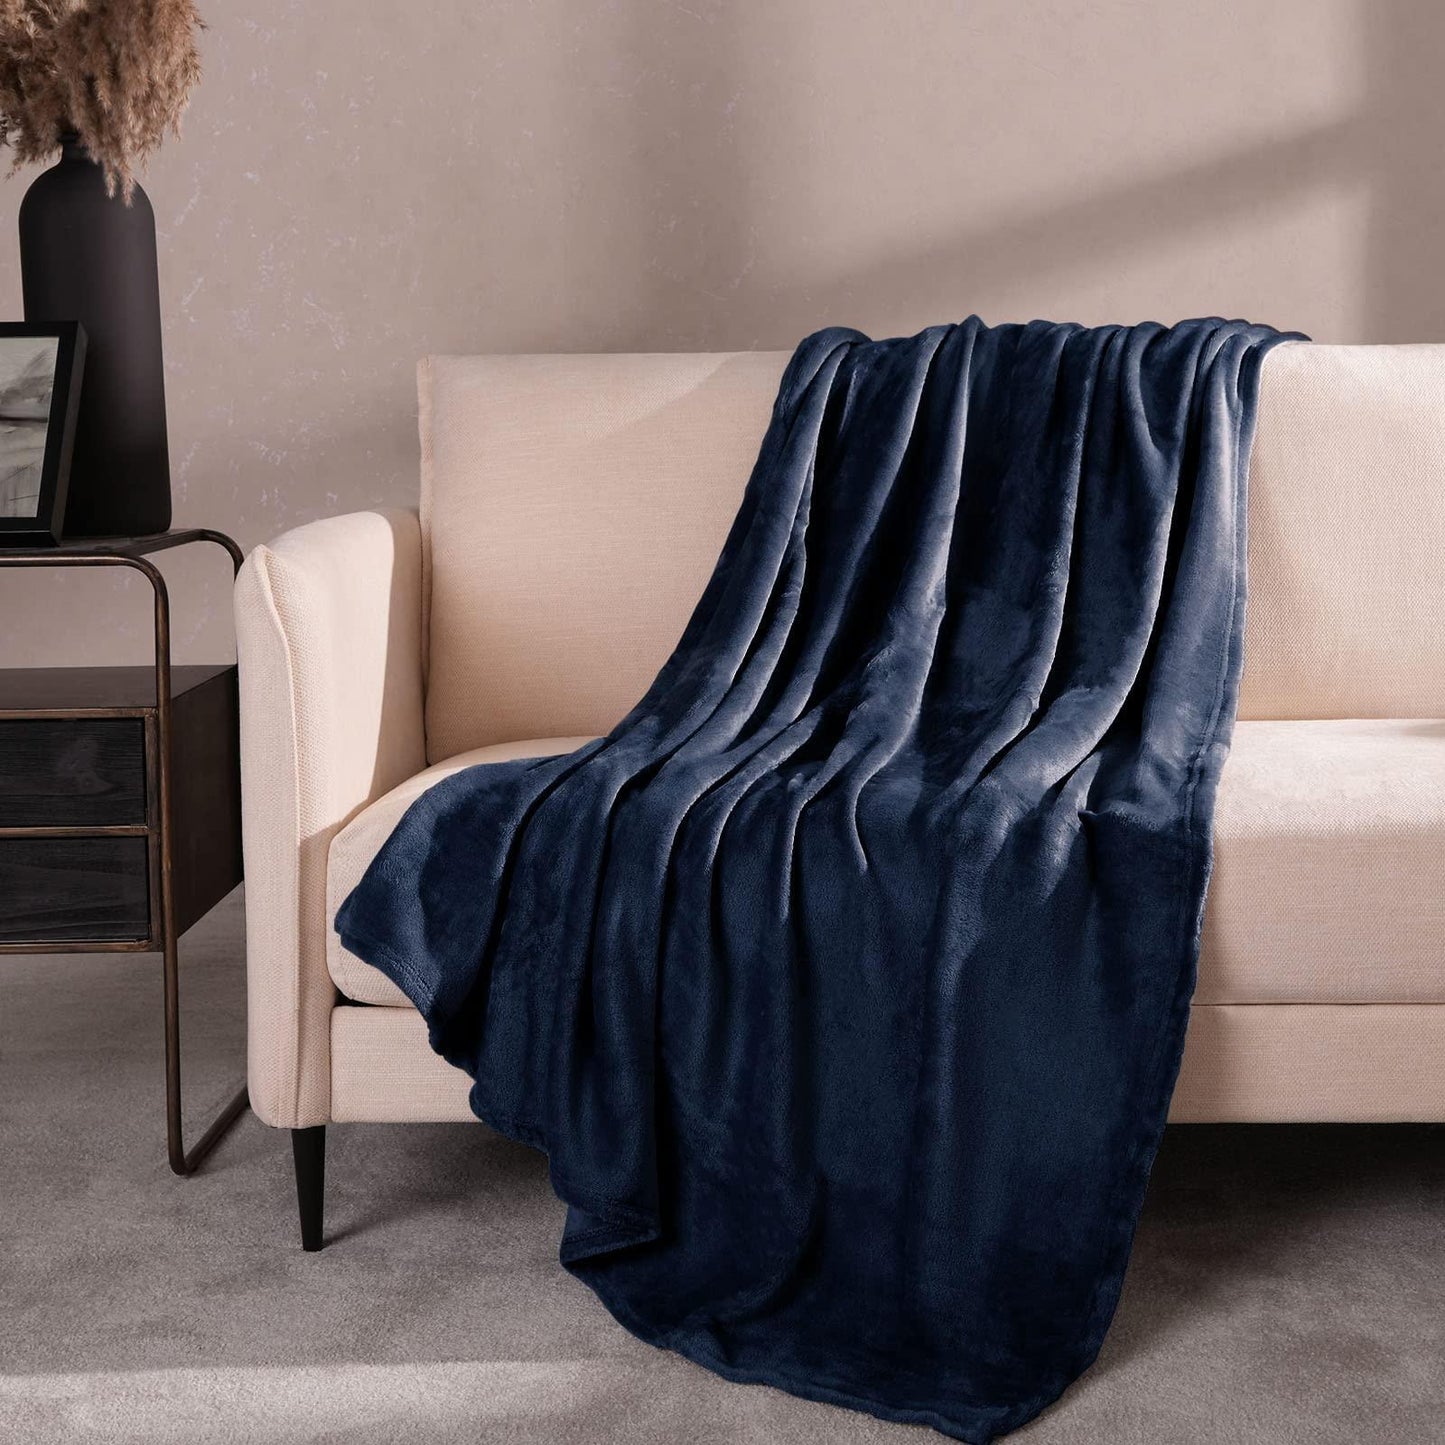 Fleece Ultra Soft Large Blanket Throw Bedspread Anti Static for Sofa Couch Bed Camping Travel Fluffy Cozy Warm Lightweight Microfiber Navy Blue 50 x60 - Loomini